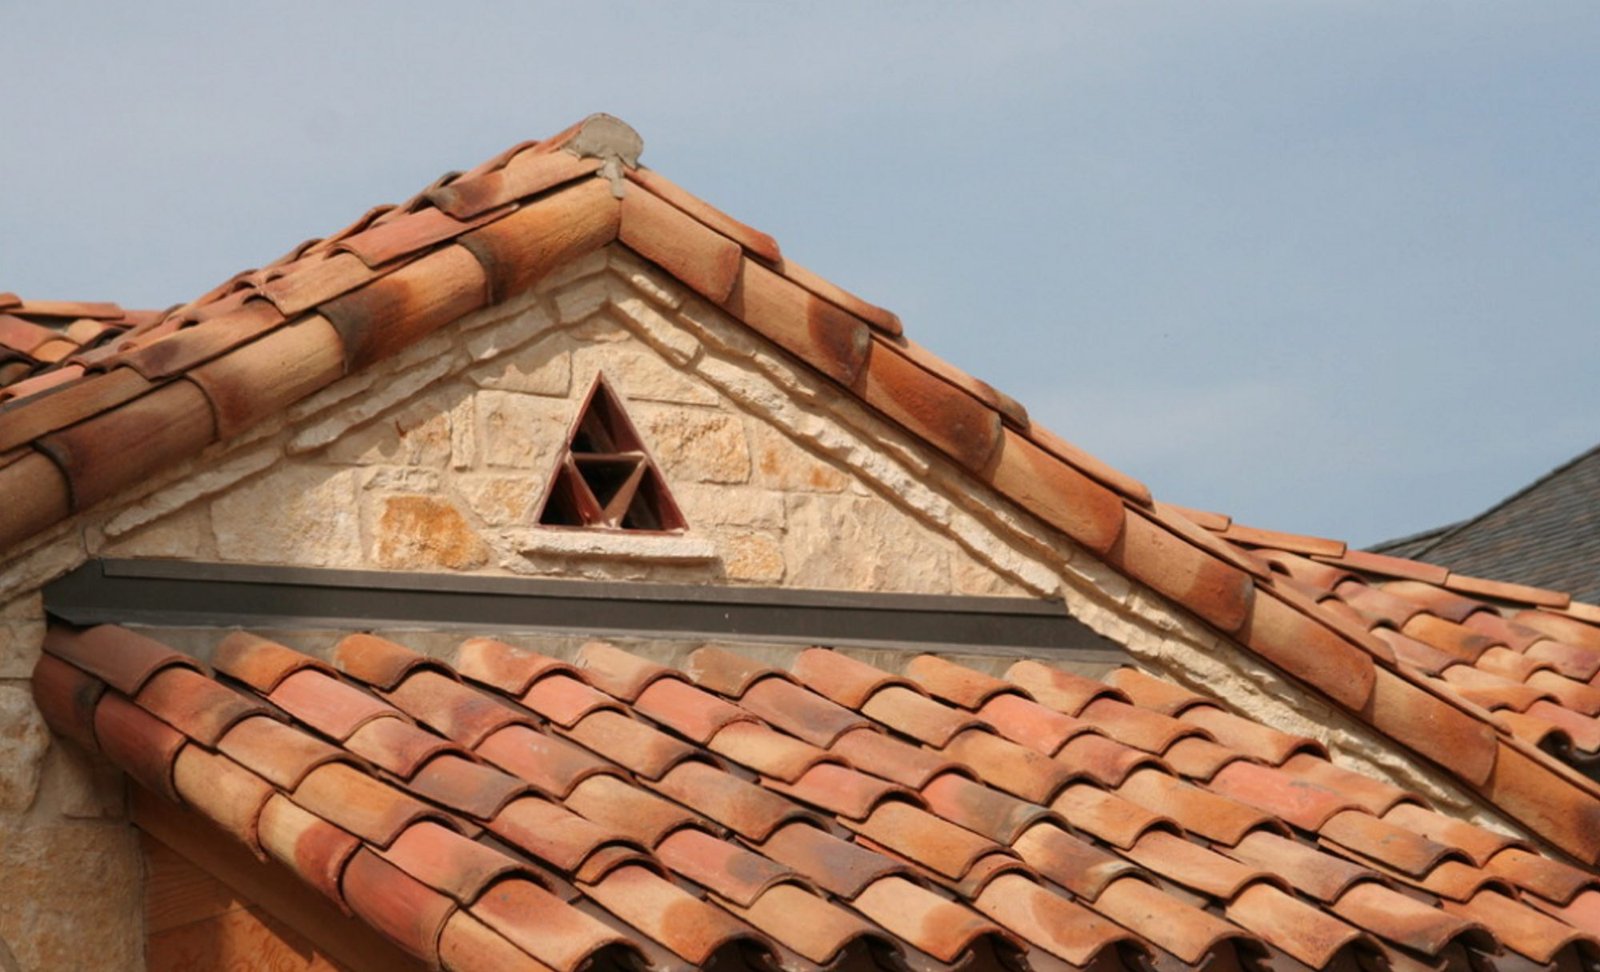 How to Paint or Stain Clay Roof Tiles